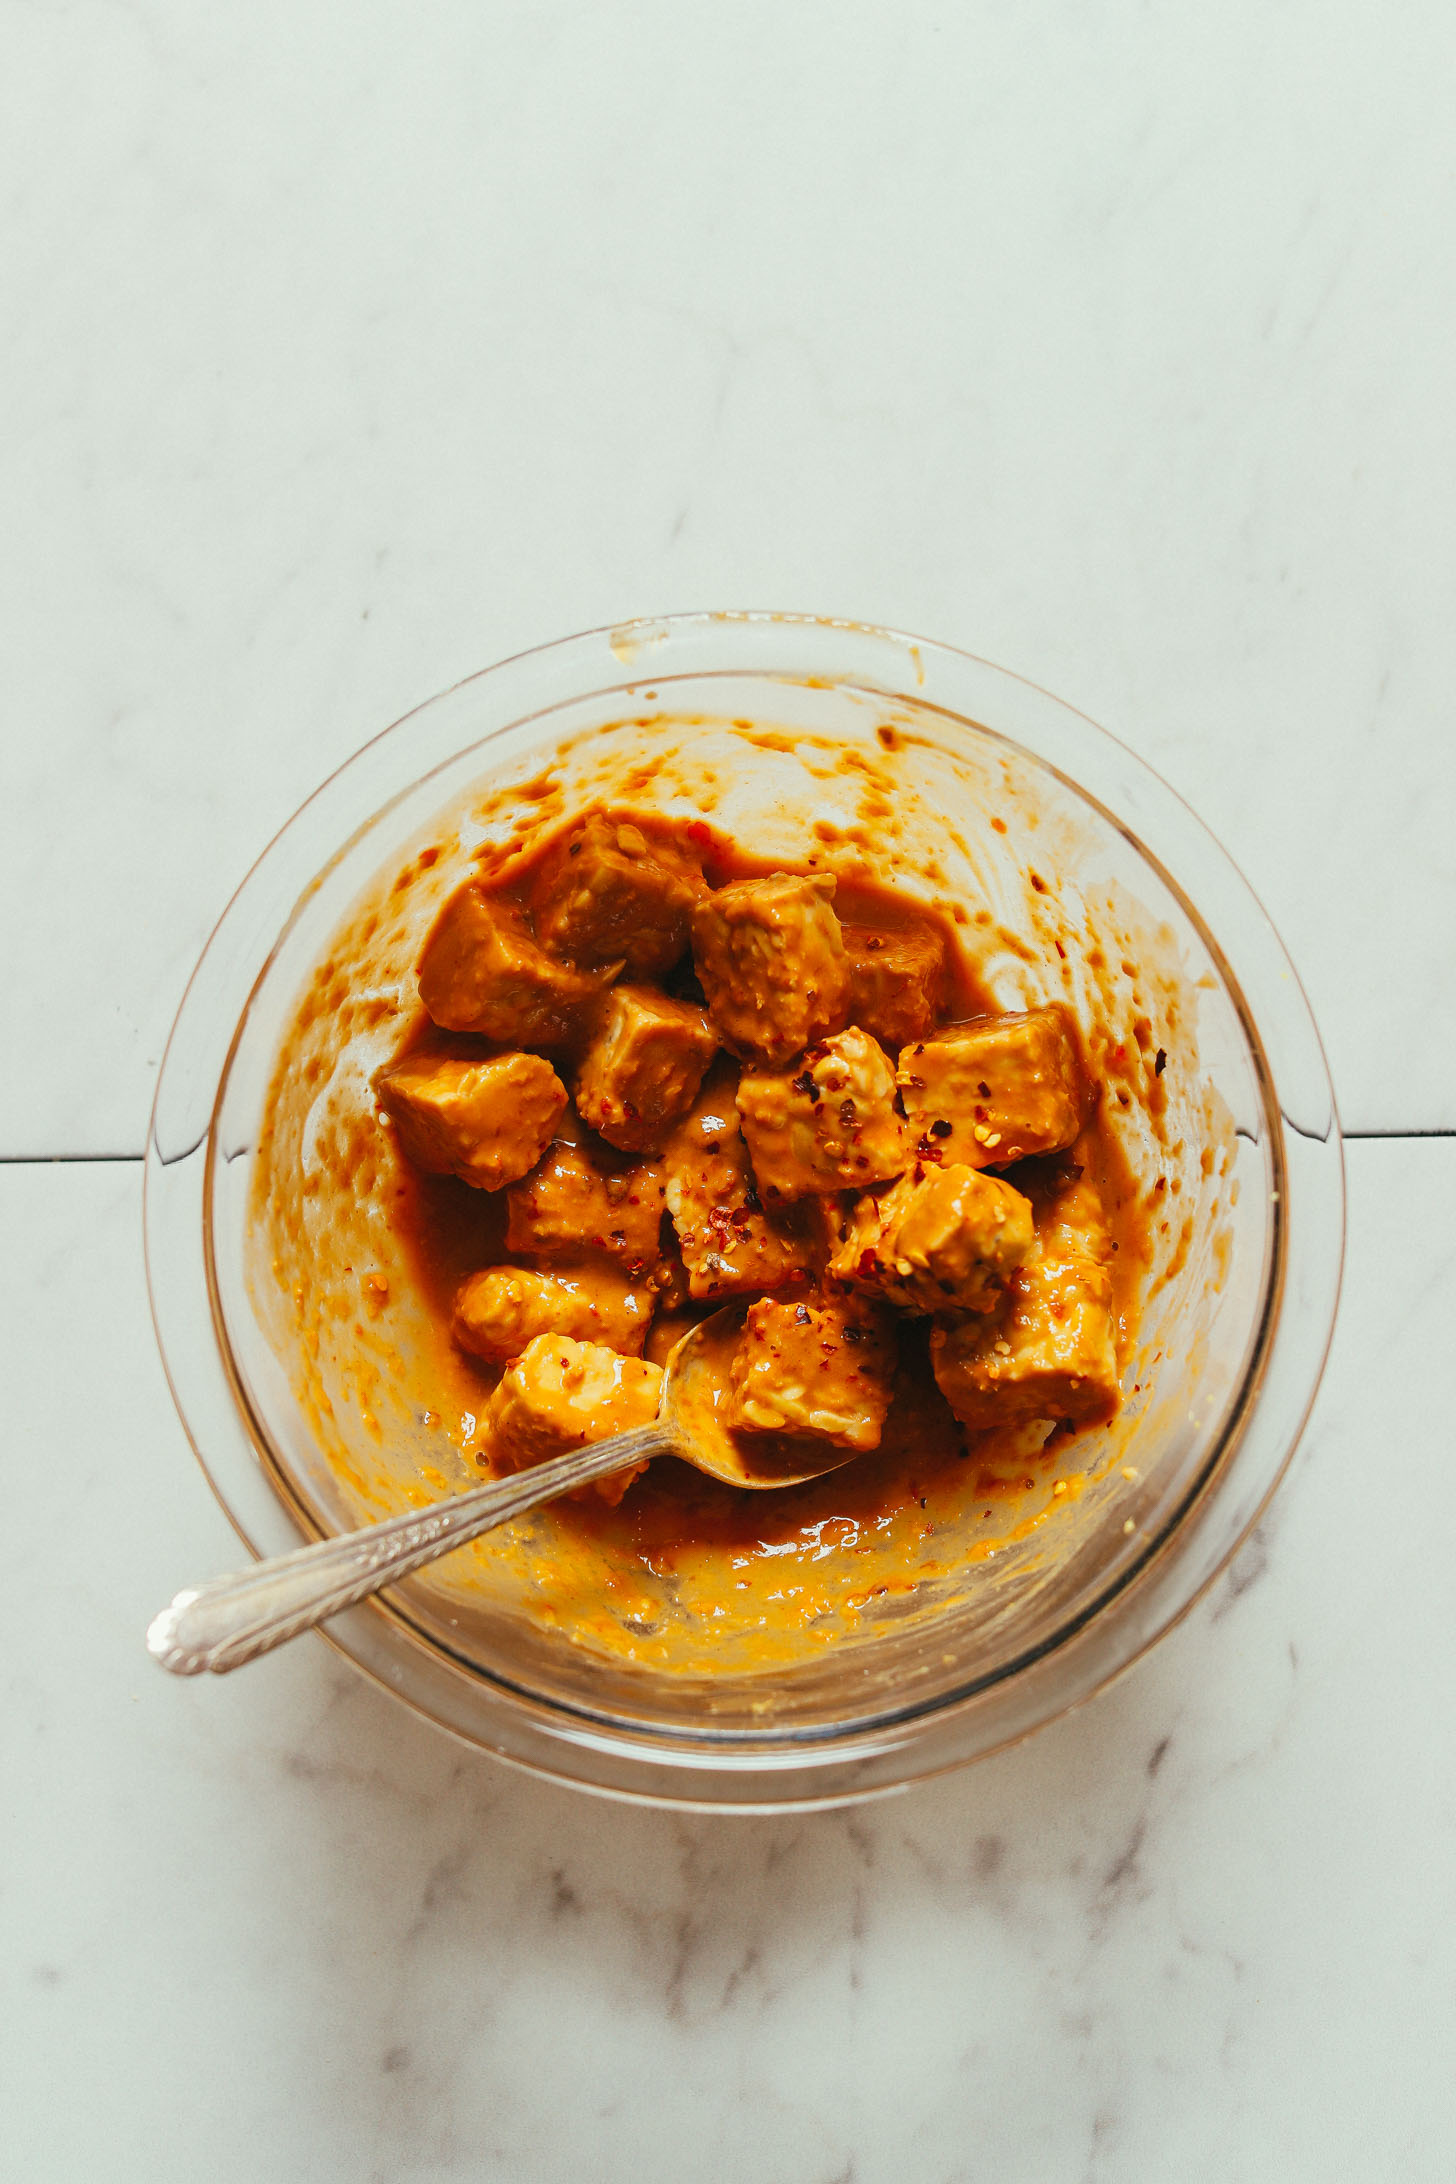 Overhead image of bowl with tempeh marinating in peanut sauce and a spoon for stirring